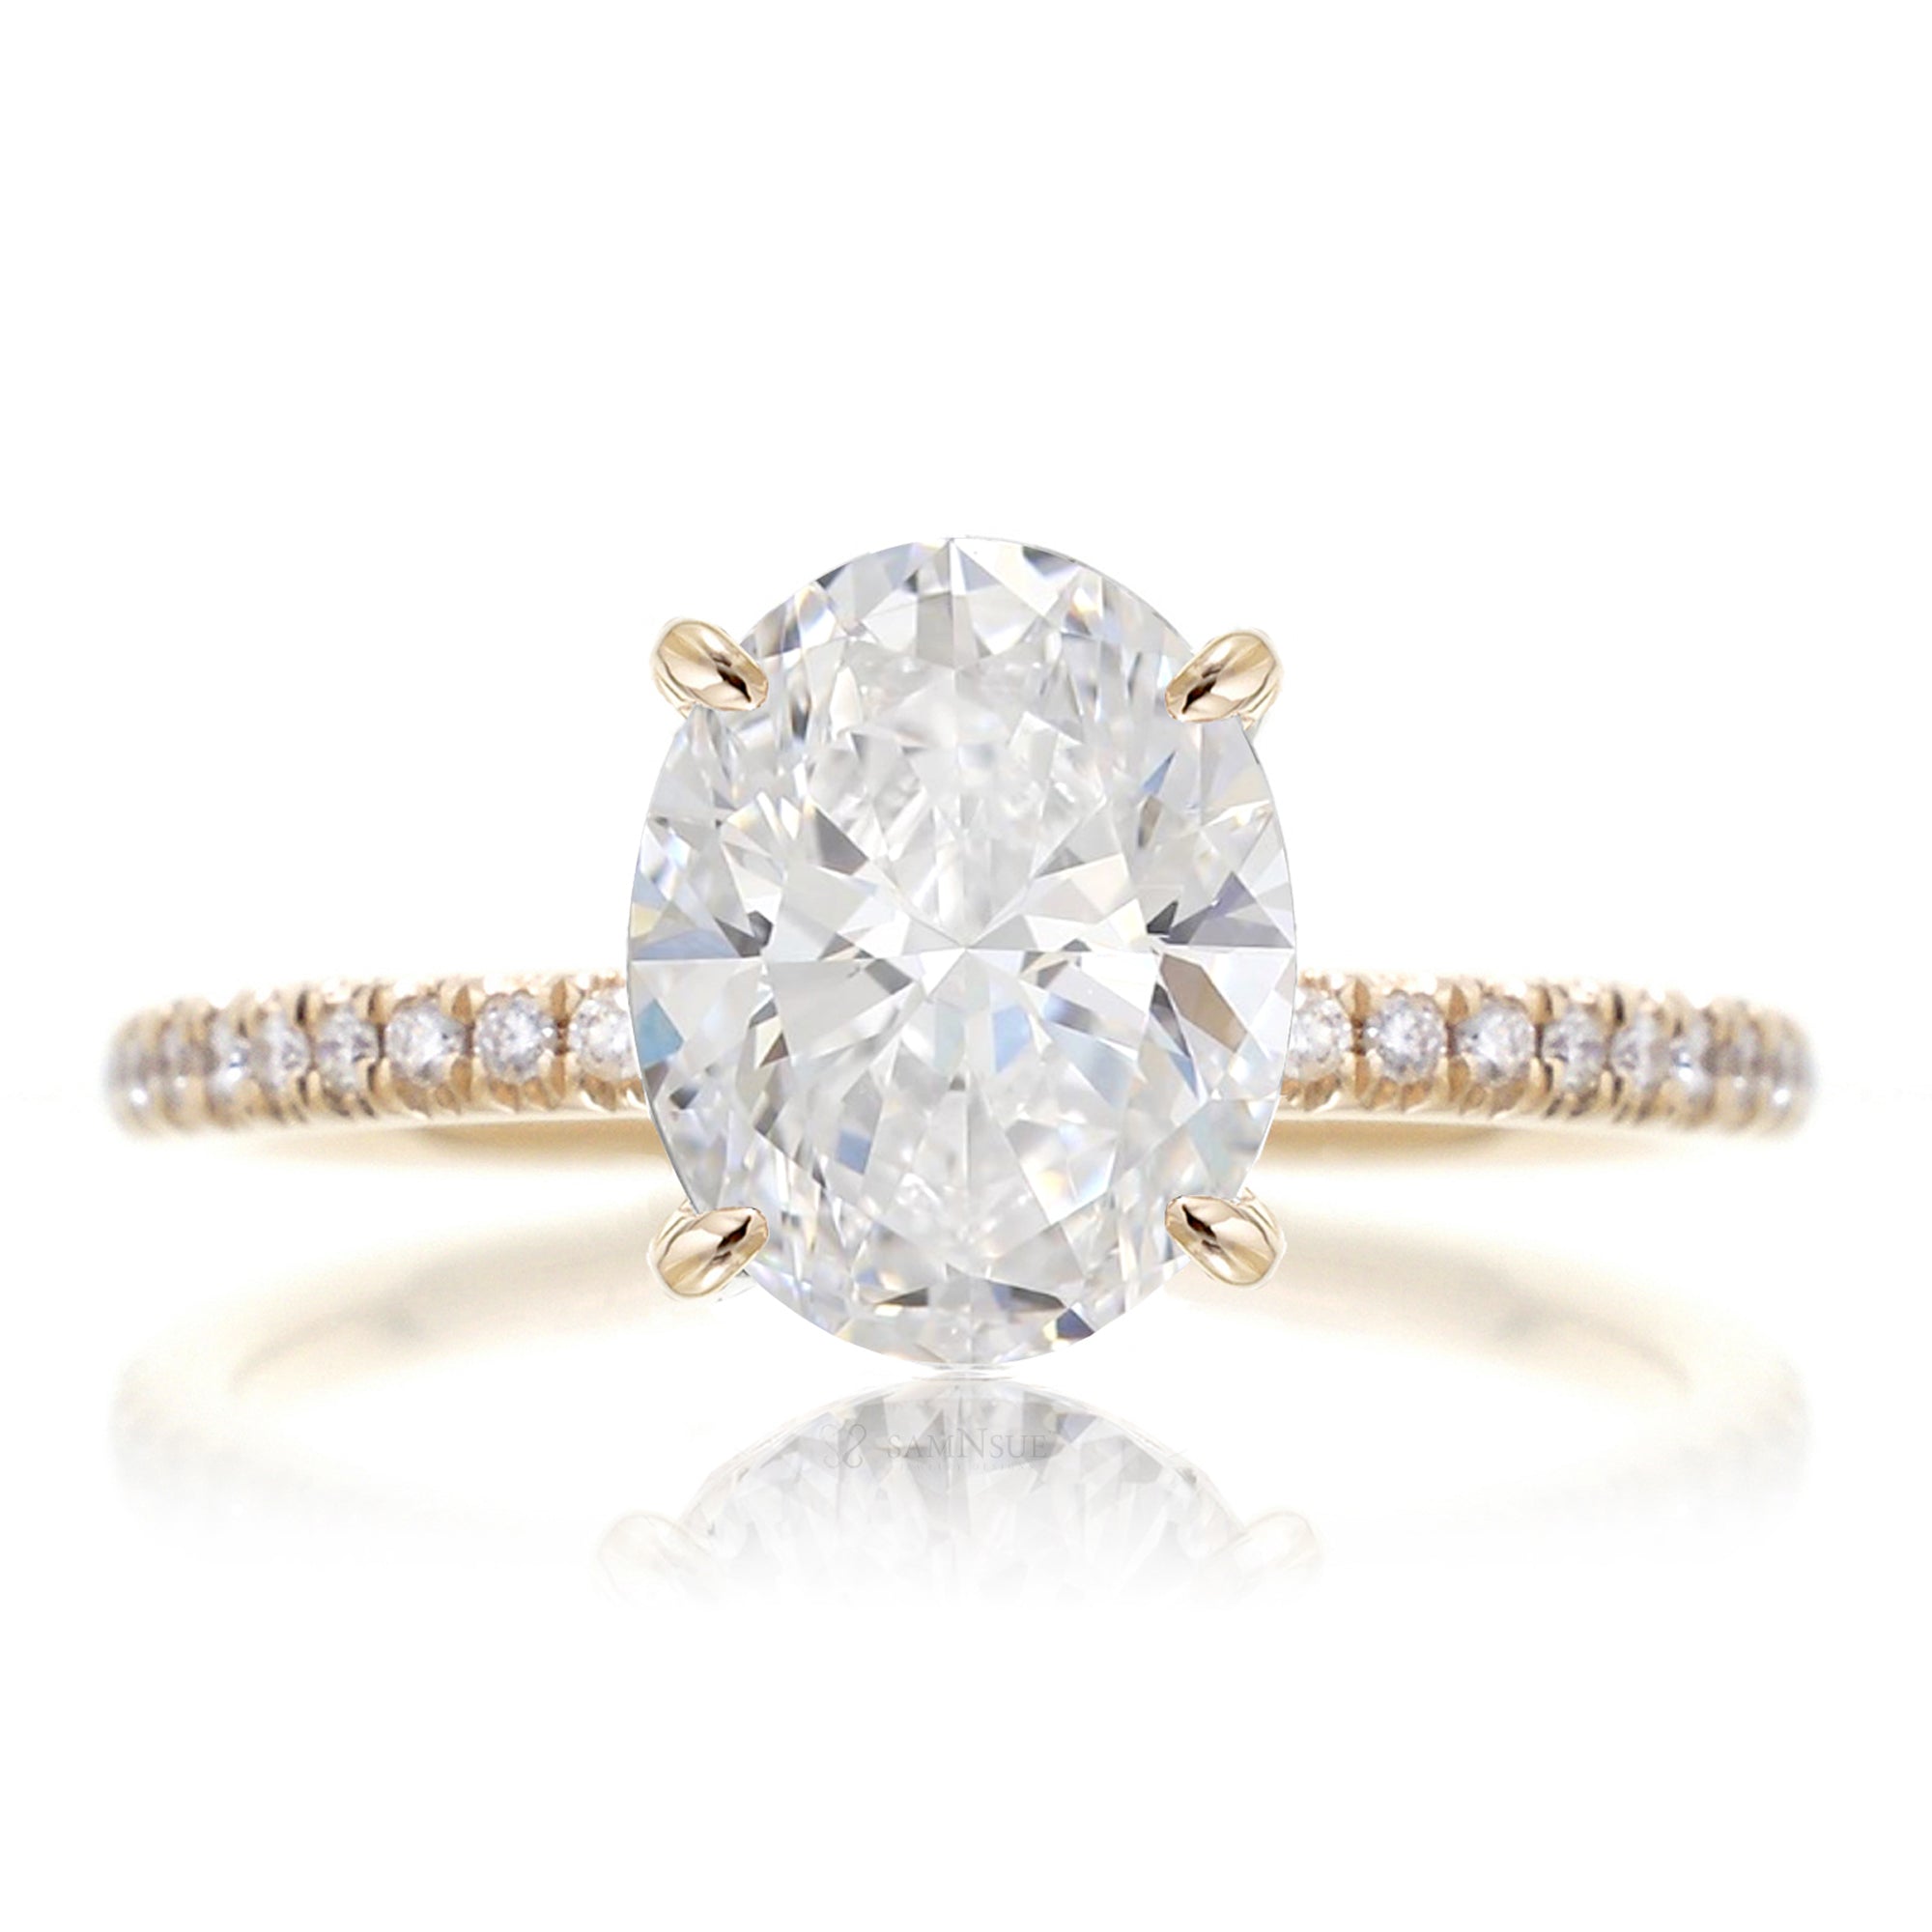 Oval cut lab-grown diamond engagement ring yellow gold - The Ava